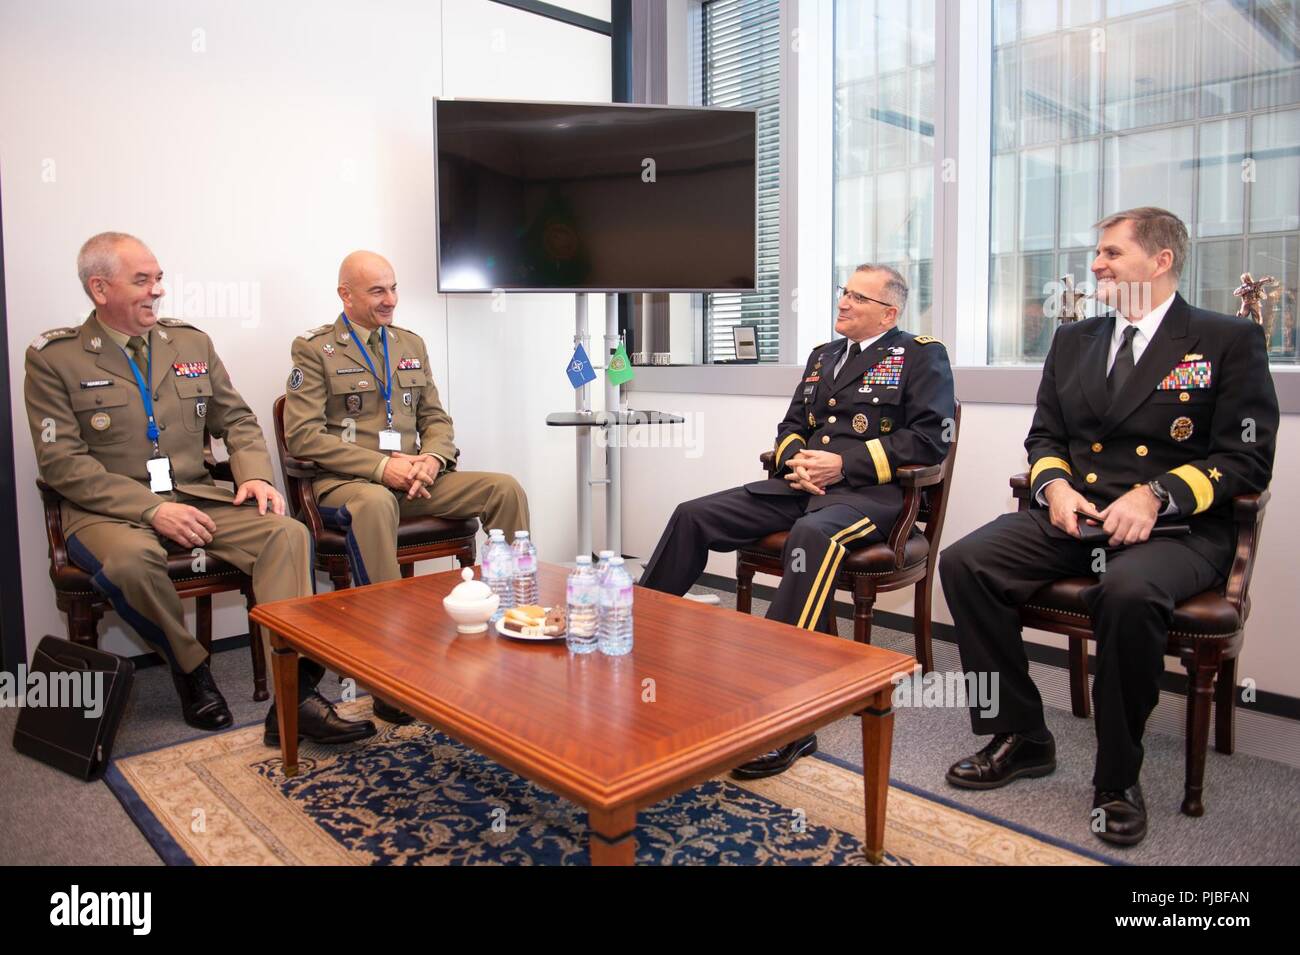 General Curtis M. Scaparrotti, Supreme Allied Commander Europe, meets with Lieutenant General Rajmund Andrzejczak, Polish Armed Forces chief of defence, and Lieutenant General Janusc Adamczak, Polish Military Representative, at NATO HQ, Brussels, Belgium, during the Brussels Summit, July 11, 2018. General Scaparrotti attended the Brussels Summit to provide military guidance to the Atlantic Council and to meet with with military and political leadership from throughout the Alliance. (NATO Stock Photo